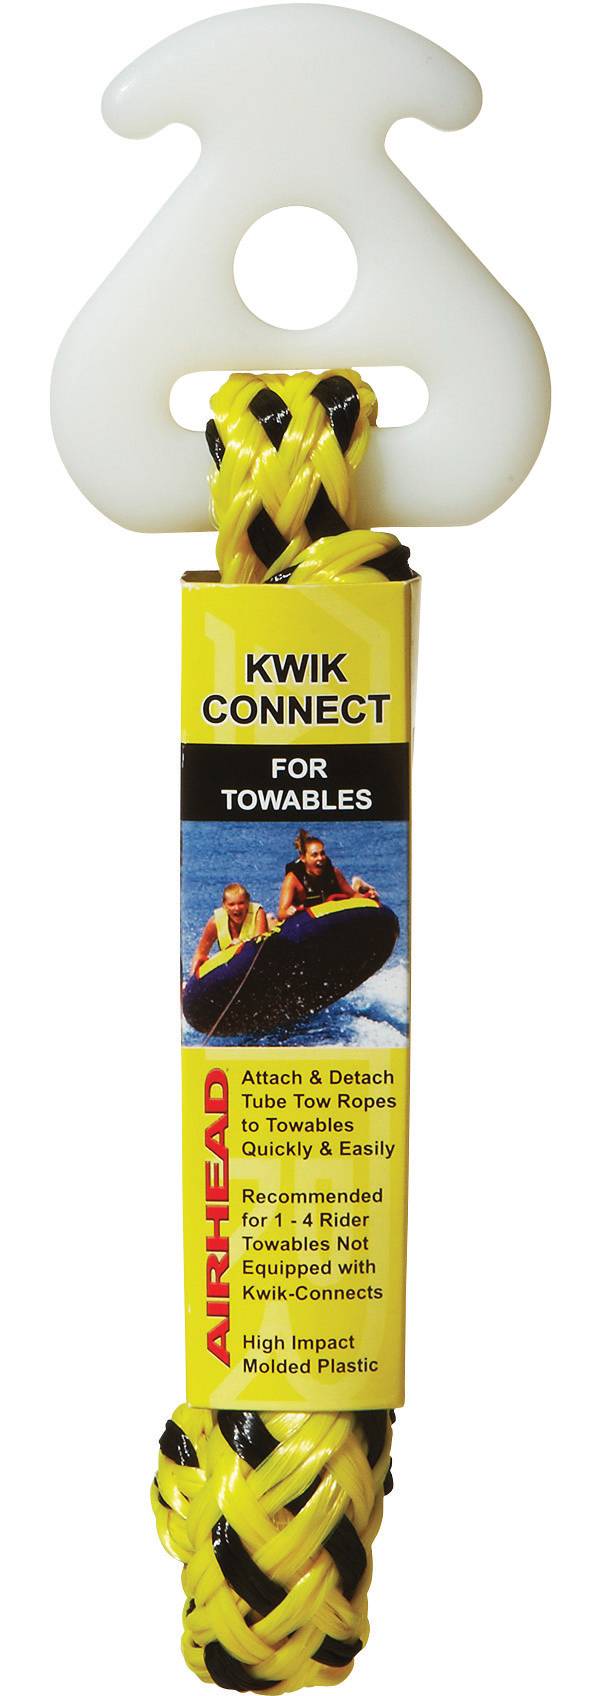 Airhead Kwik-Connect Towable Connector product image